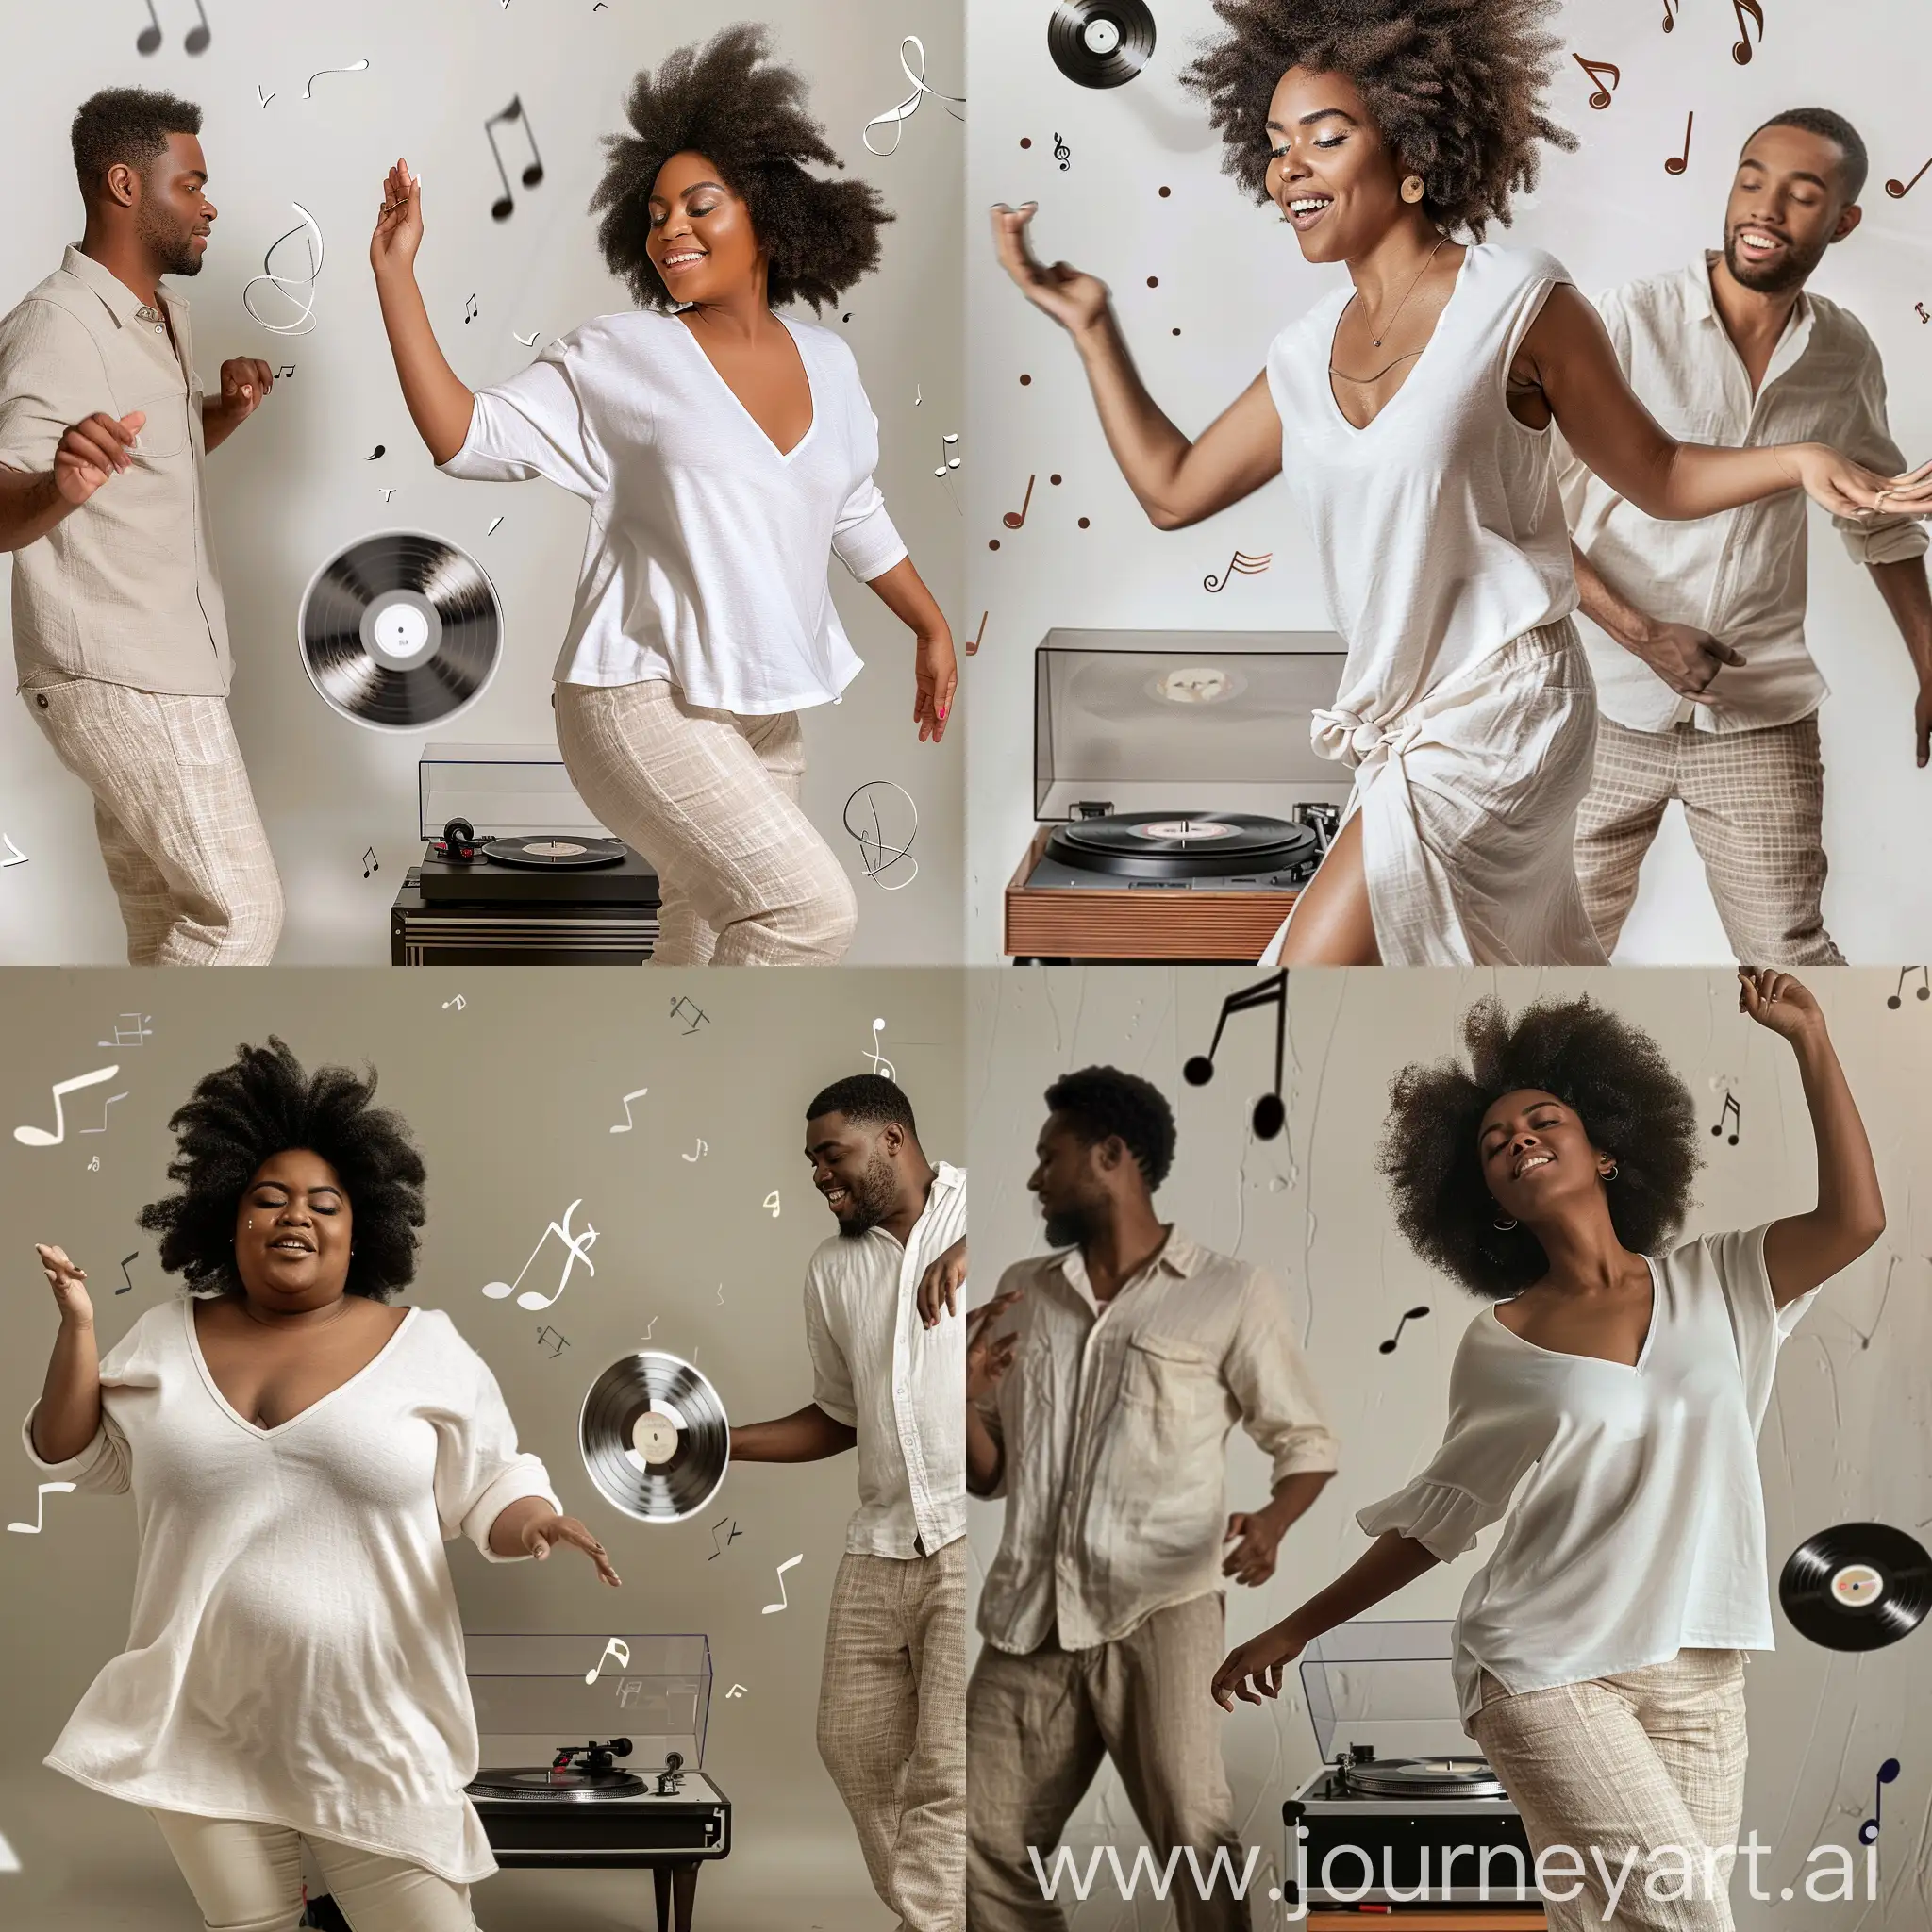 A plus-sized Black woman with a voluminous afro hairstyle is fully engaged in the joy of music, dancing rhythmically in a dynamic, joyful pose. Her outfit is a loose white V-neck top designed for movement, embodying casual elegance.  she is dancing with a black man dressed in linen pants and shirt doing the 2 step dance, The composition focuses on the woman, a spinning vinyl record on a record player, and musical notes floating in the air
